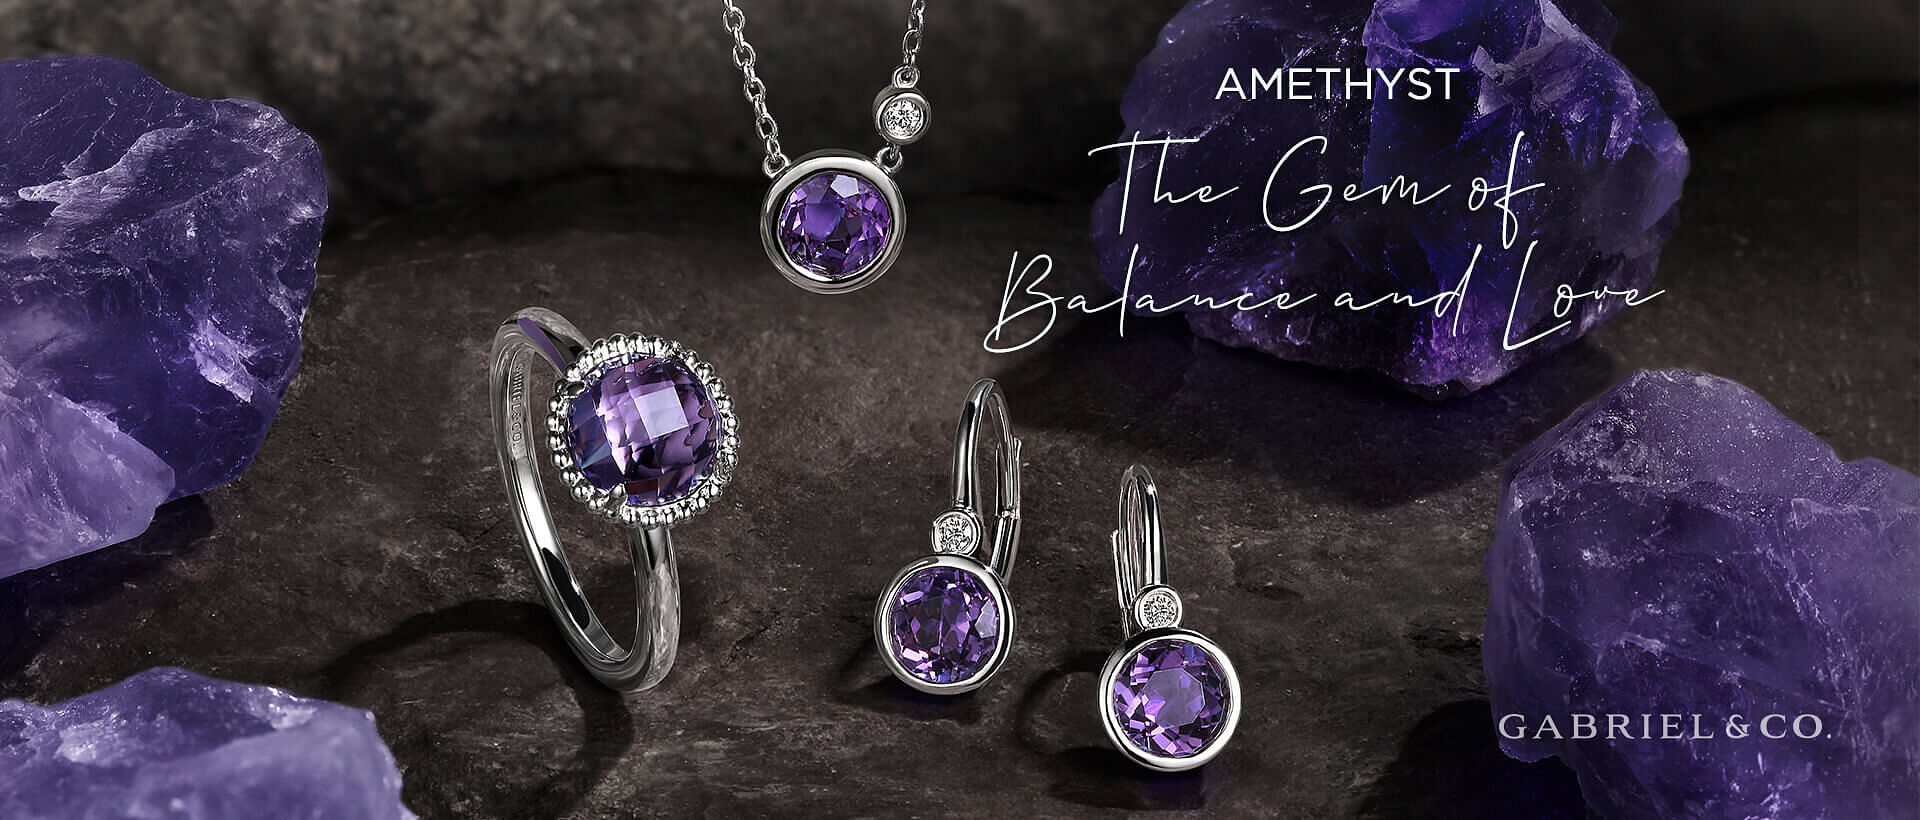 The Meaning of Amethyst | With Clarity